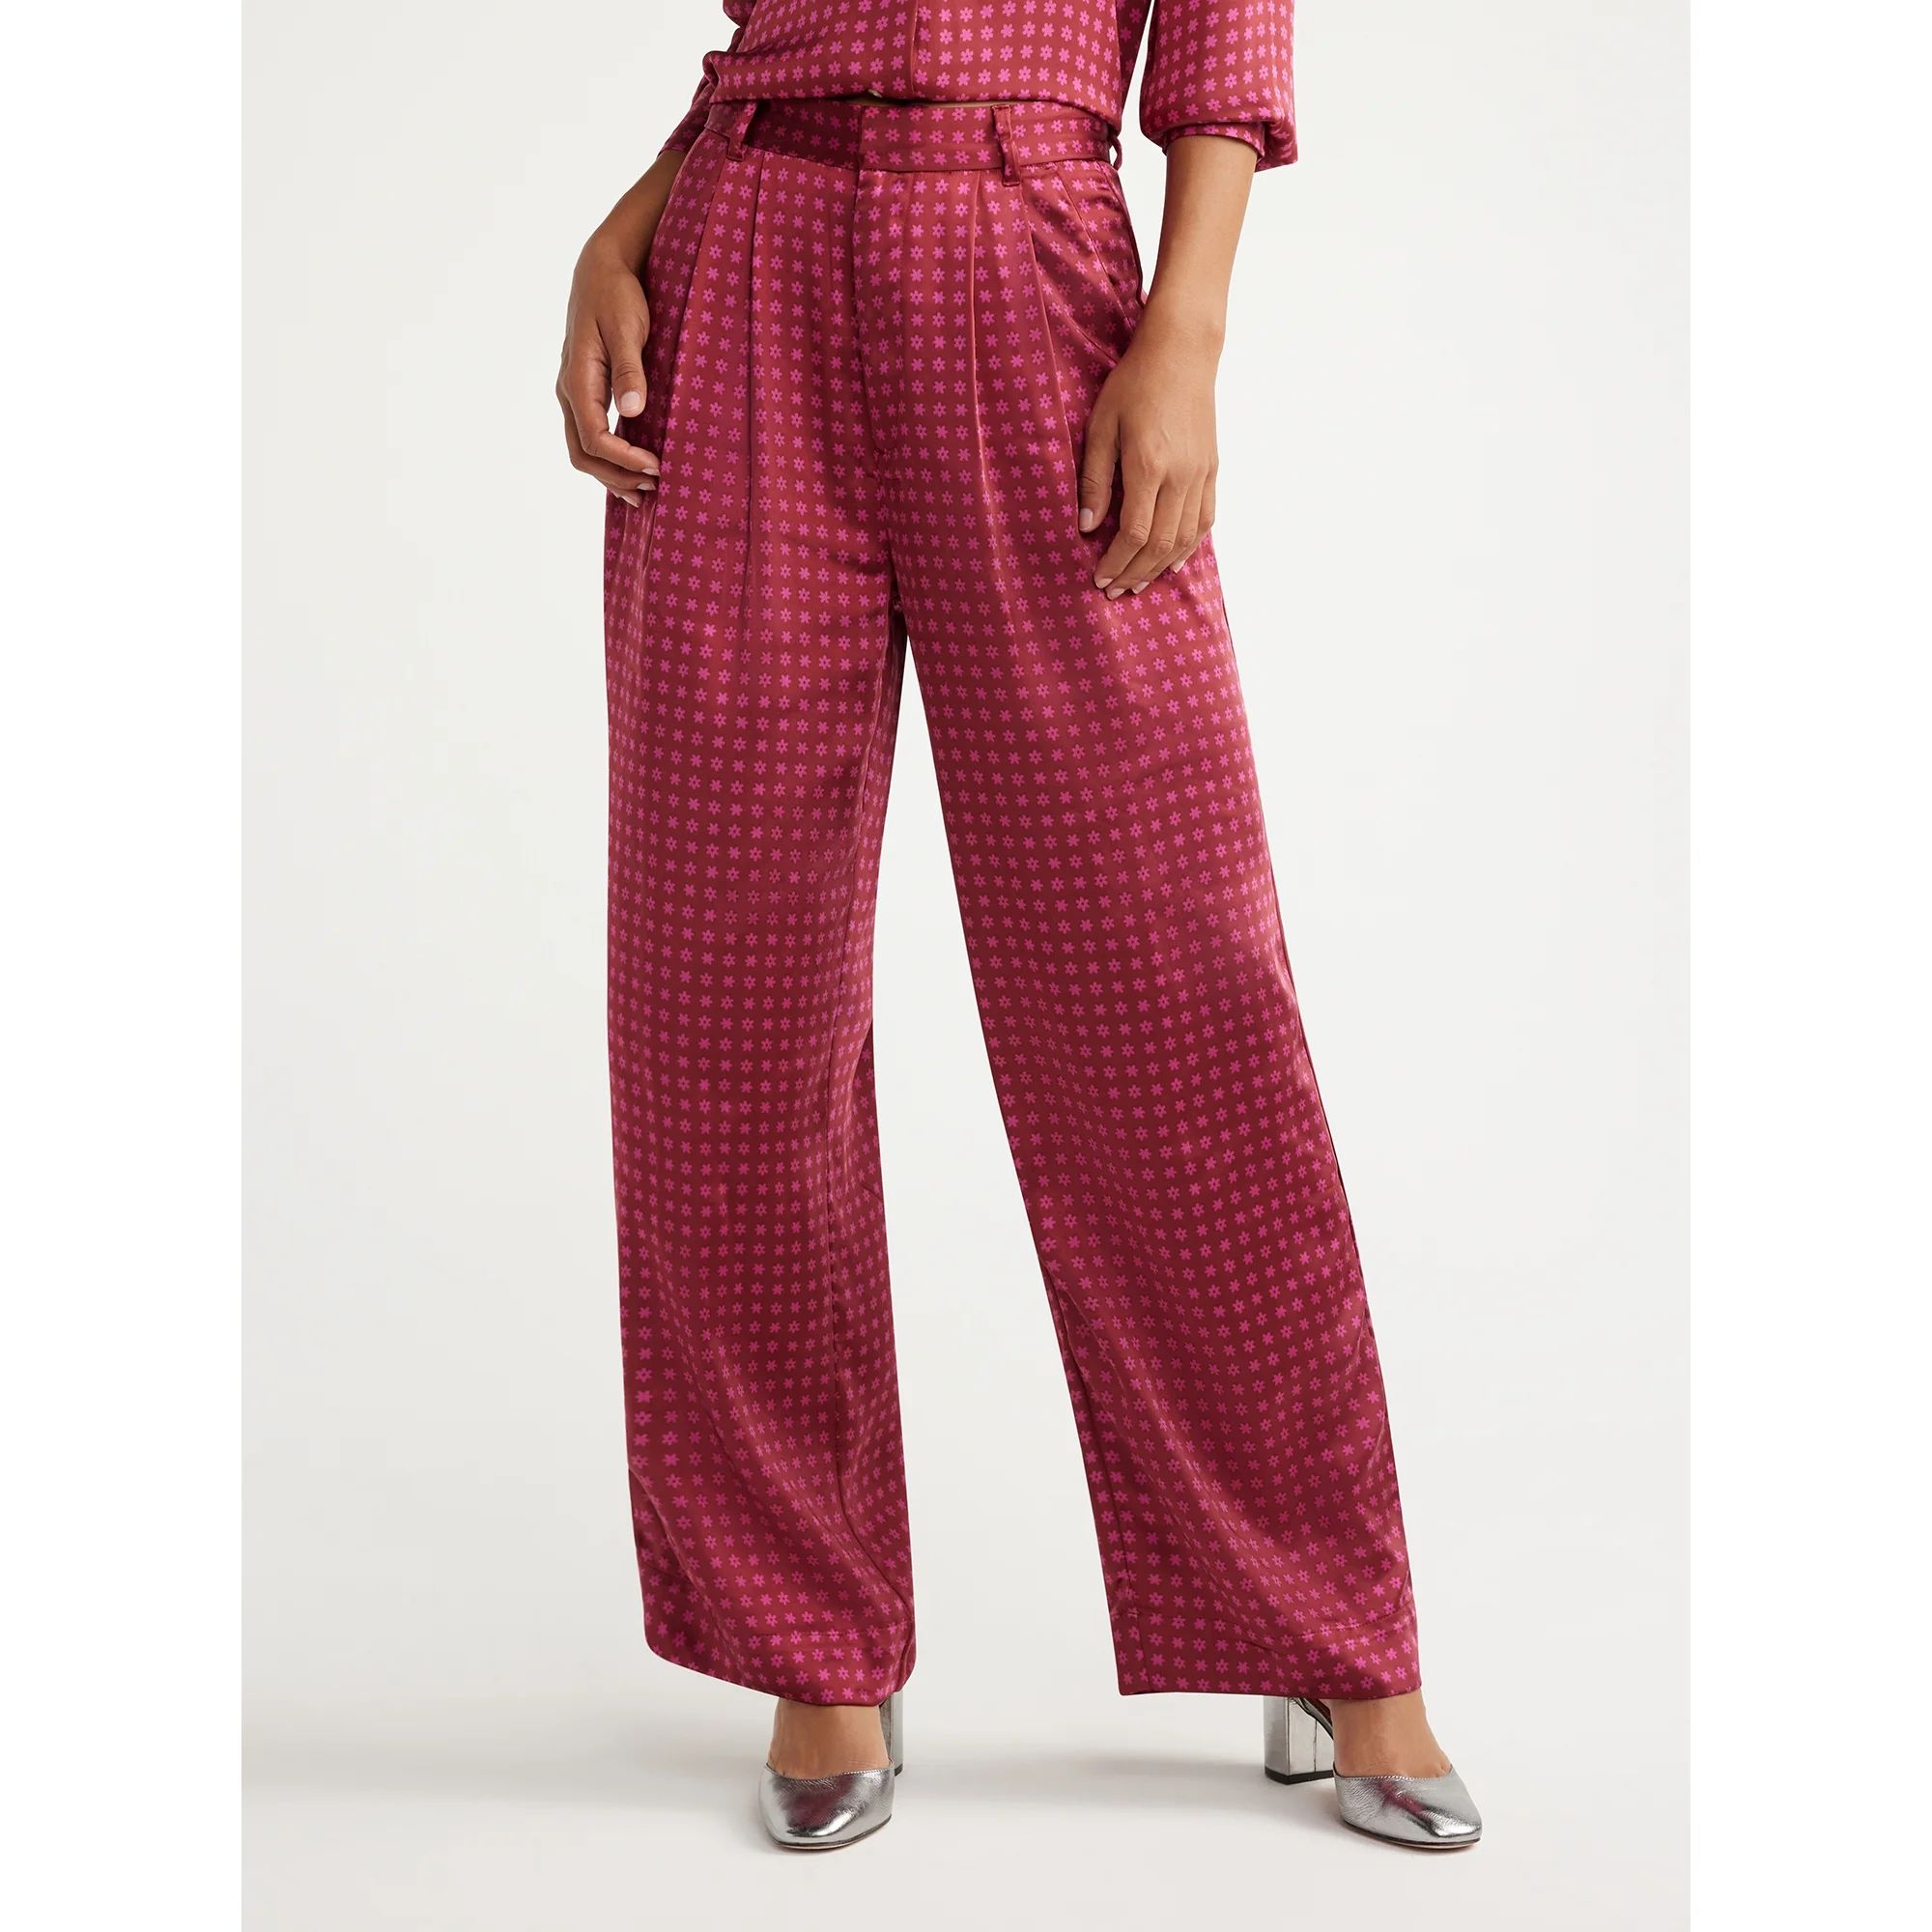 Free Assembly Women's High Rise Pleated Satin Trousers, 31” Inseam, Sizes 0-20 | Walmart (US)